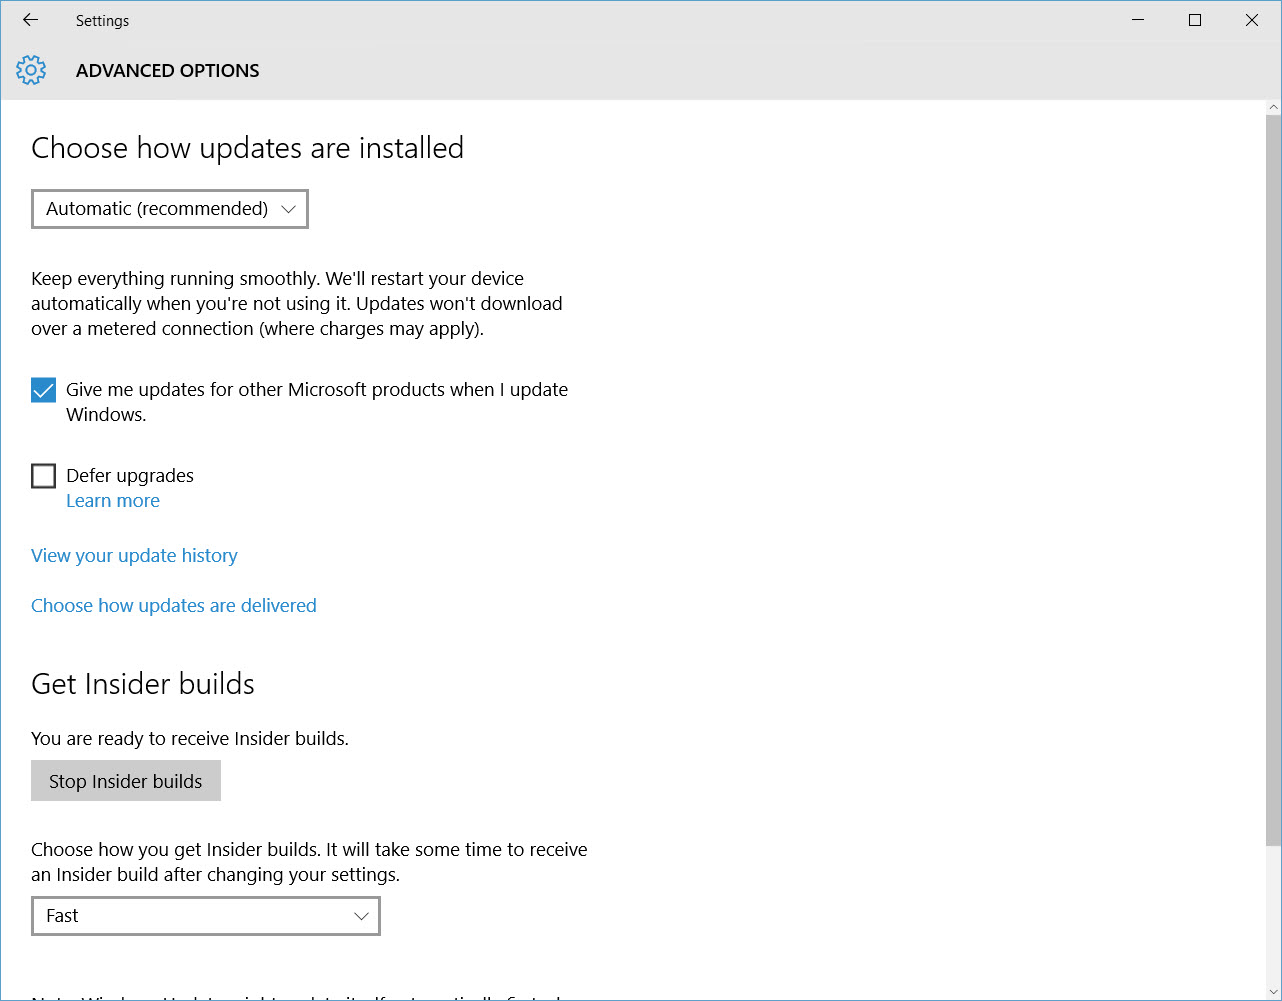 Upgrading to Windows 10 build 10159 (Image Credit: Russell Smith)